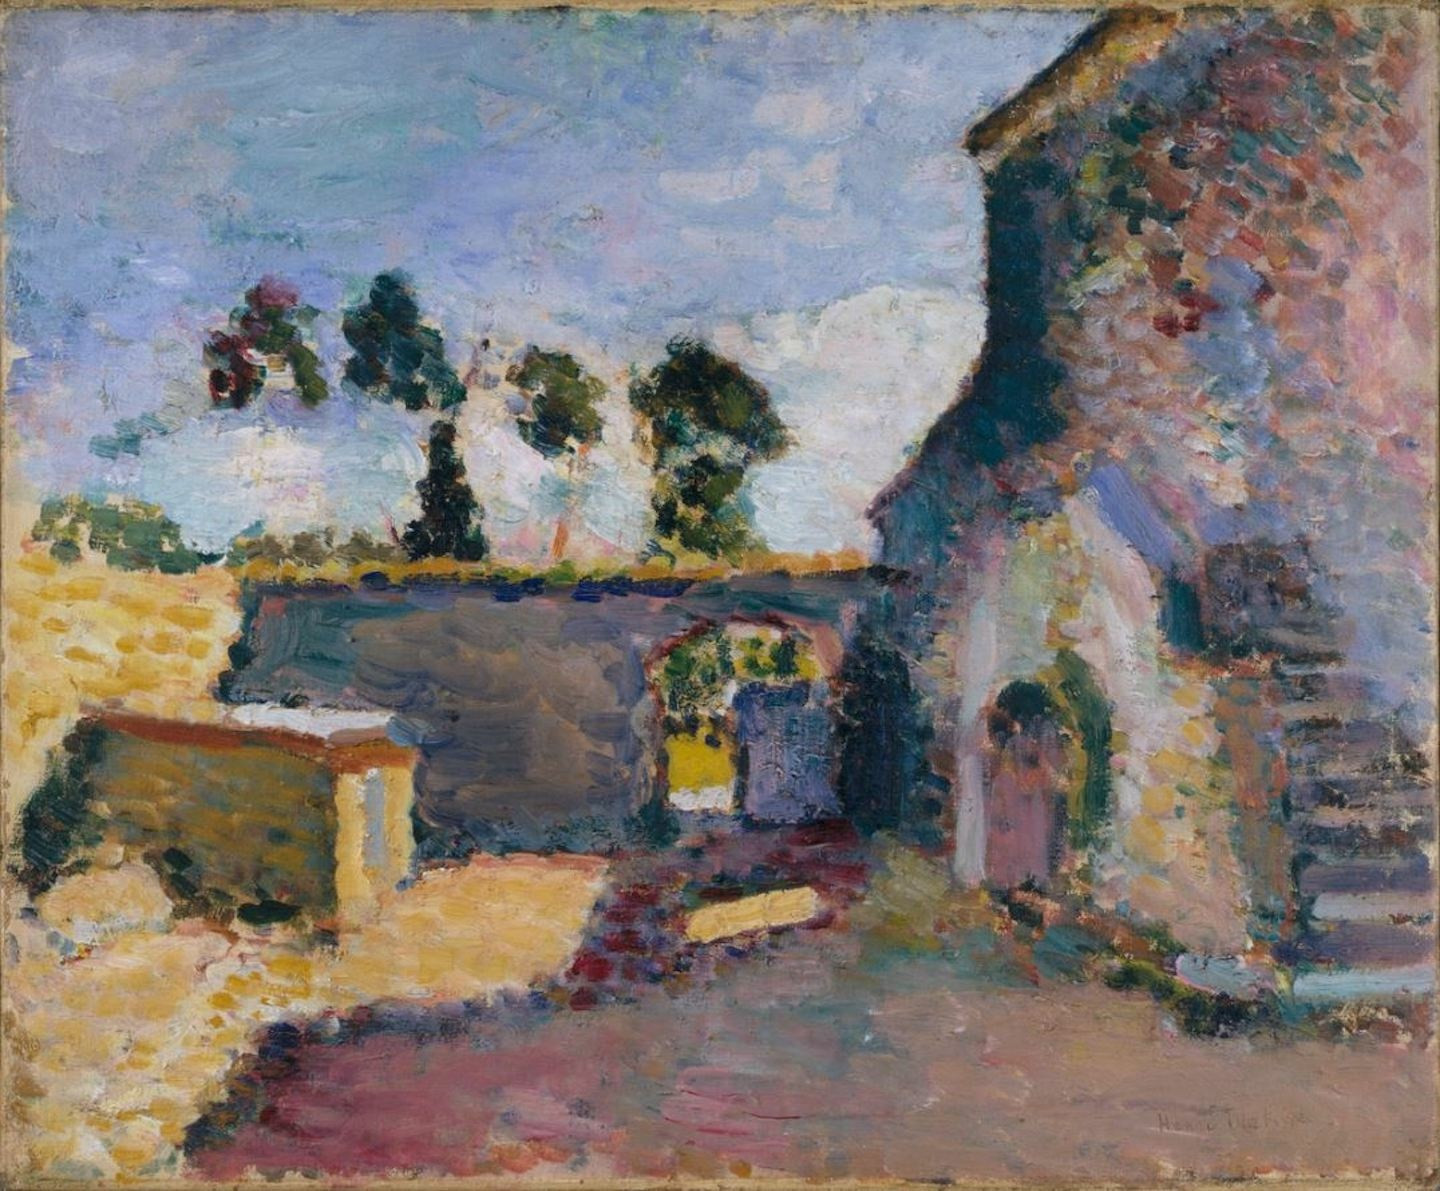 Henri Matisse. *Corsica, the Old Mill*. 1898. Oil on canvas, 15 3/16 × 18 1/8ʺ (38.5 × 46 cm). Wallraf-Richartz-Museum, Cologne